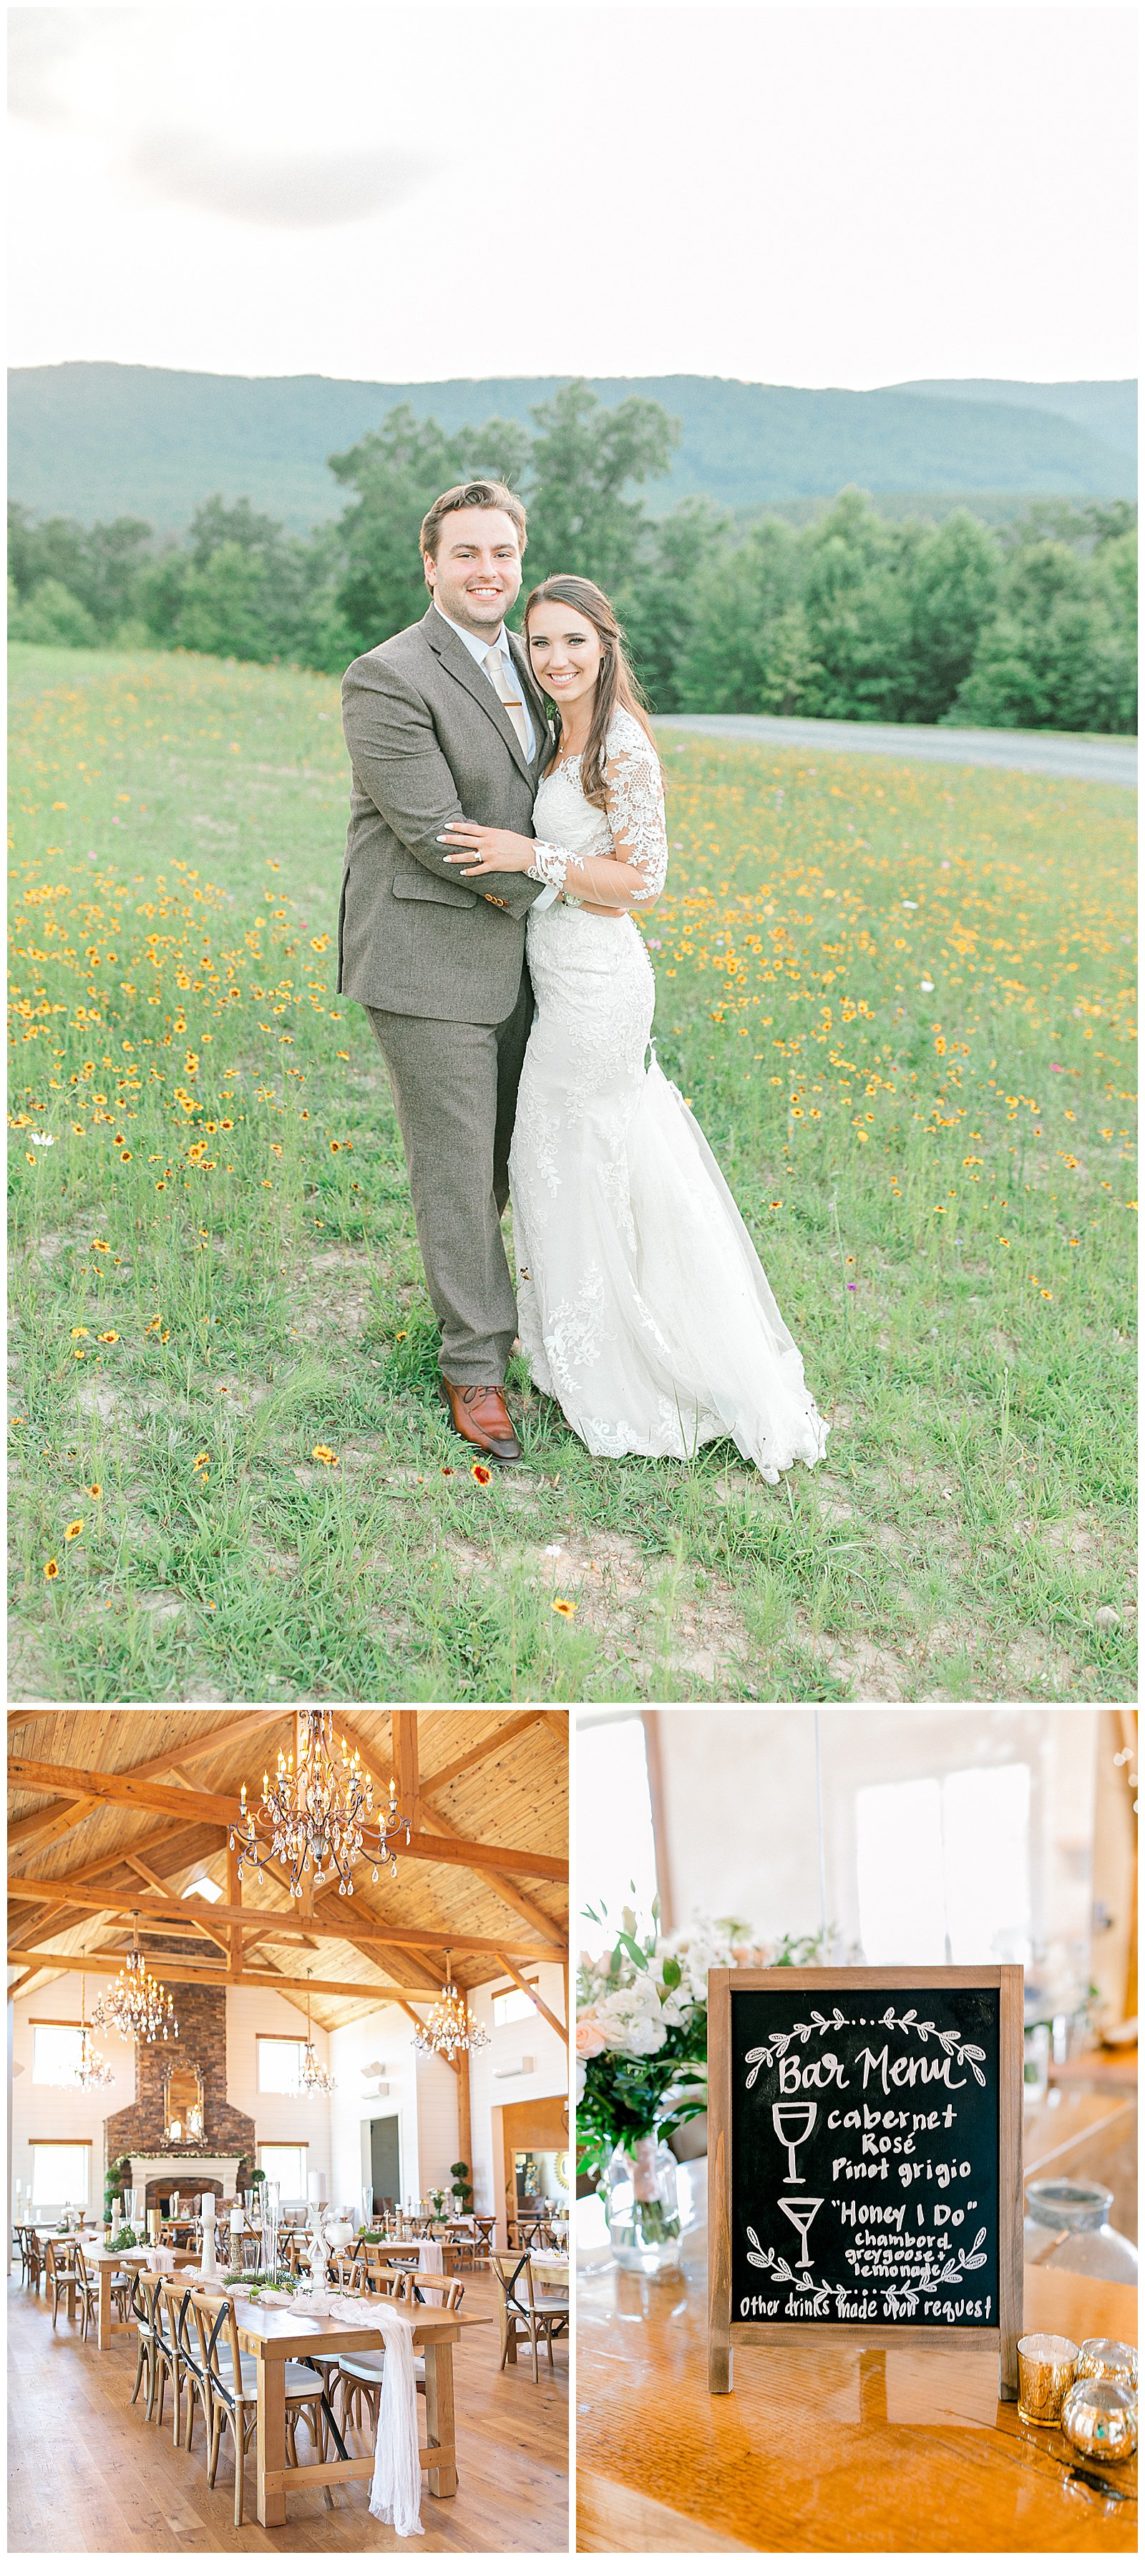 Bride and groom at The Seclusion Wedding venue in Lexington, Virginia